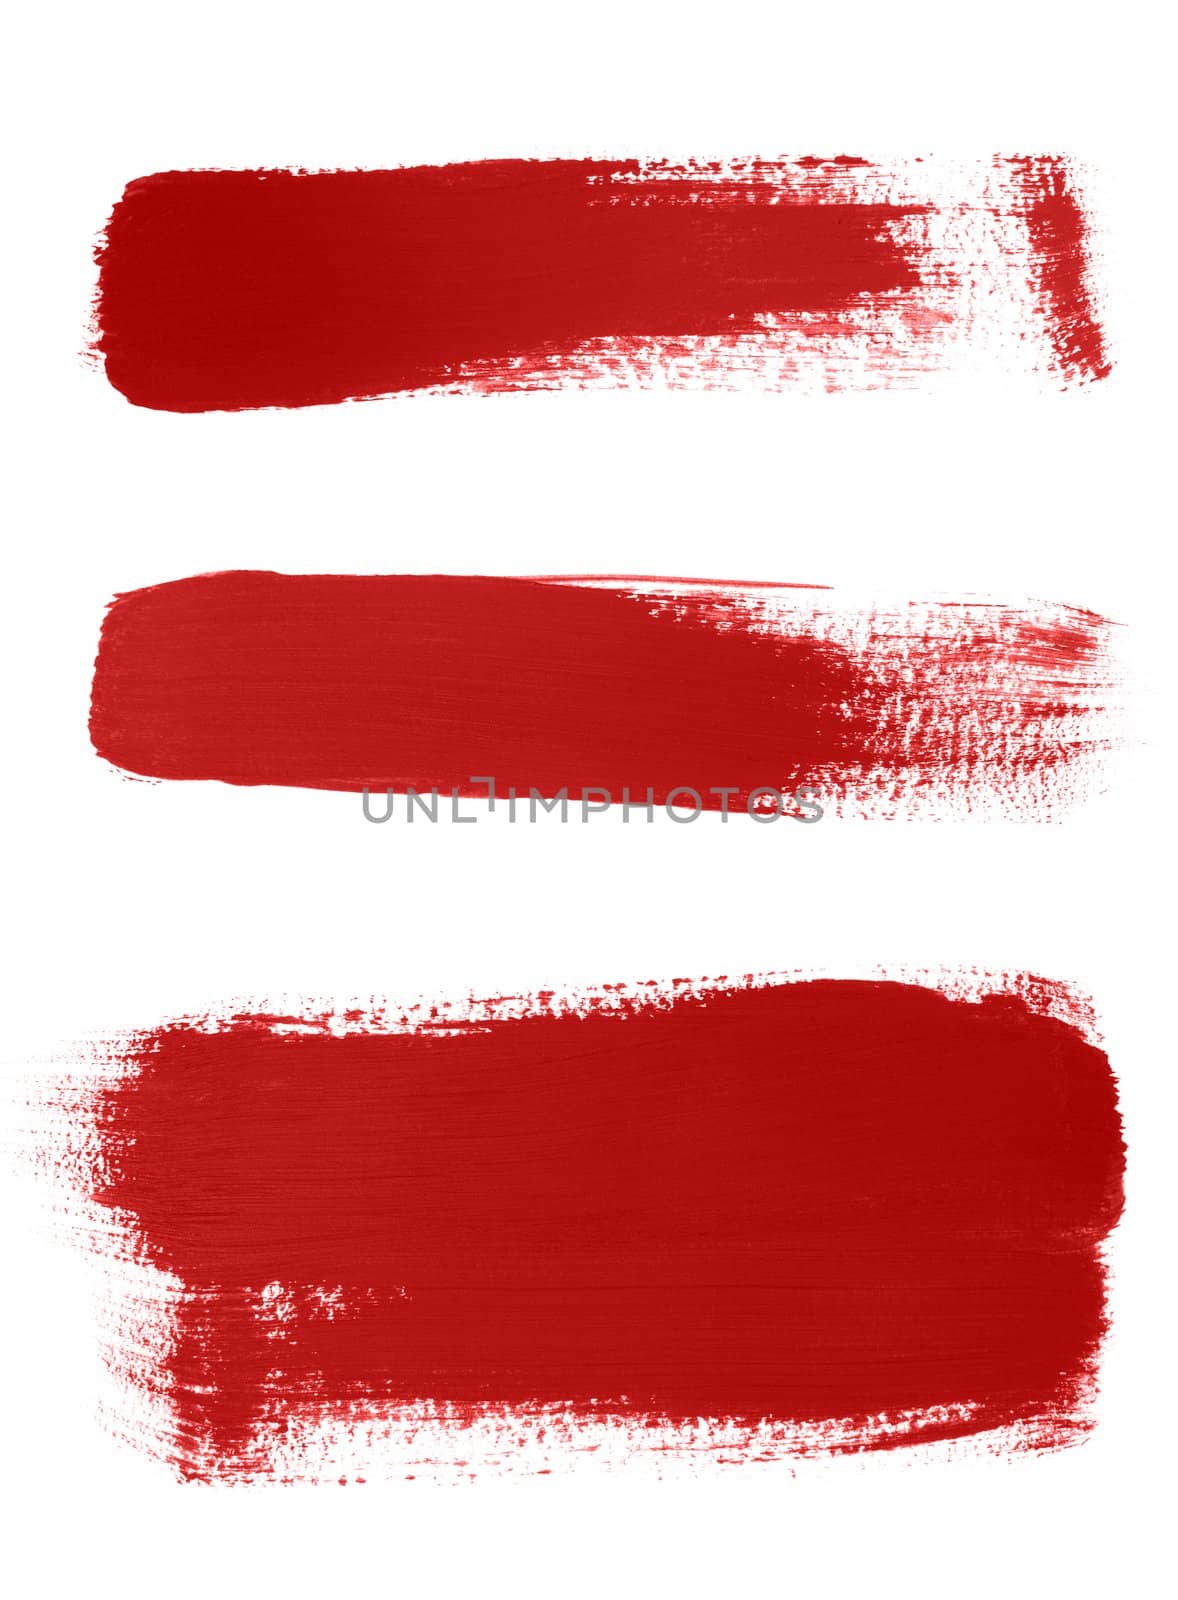 High-resolution texture of red brush strokes on white background.